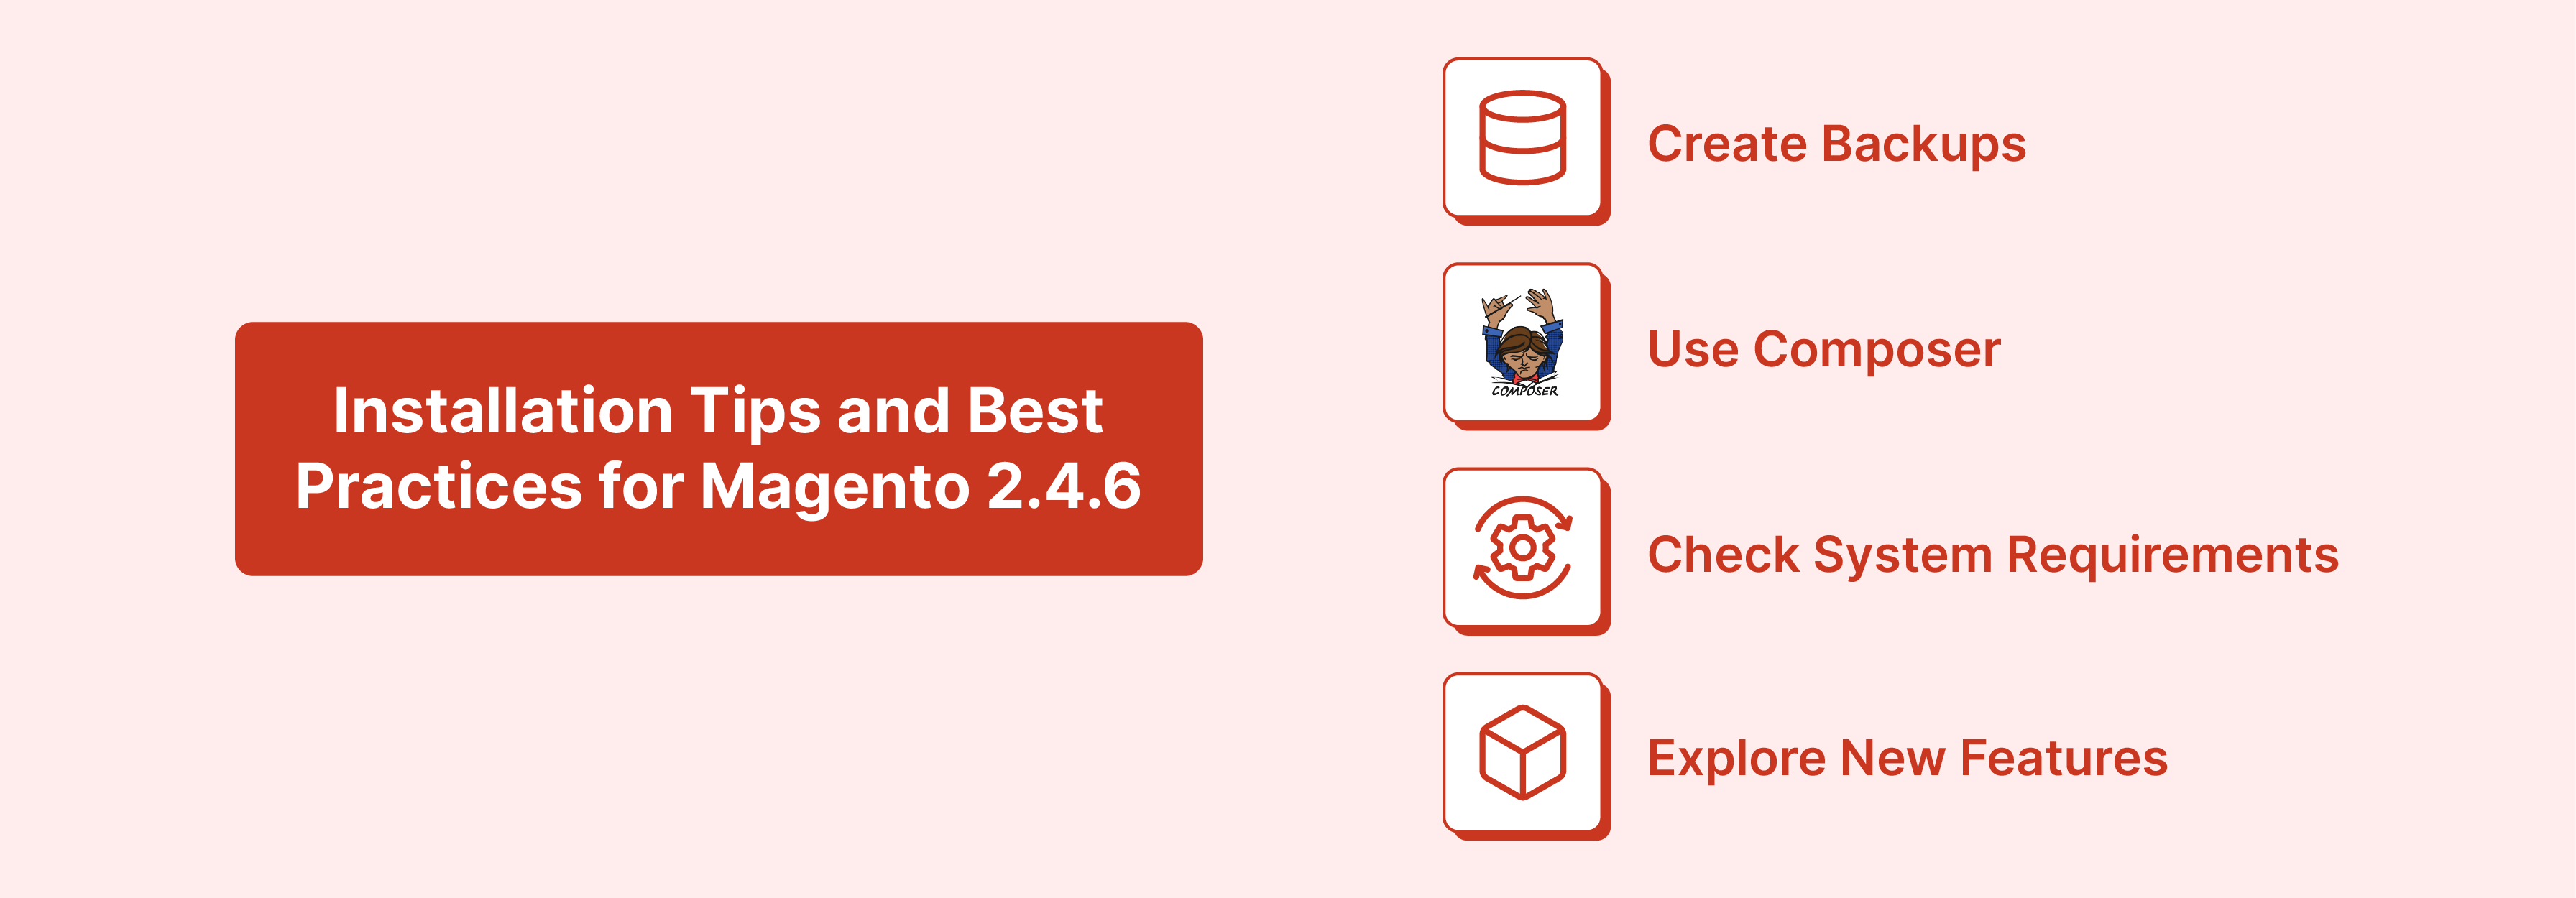 Tips and Best Practices to install Magento 2.4.6